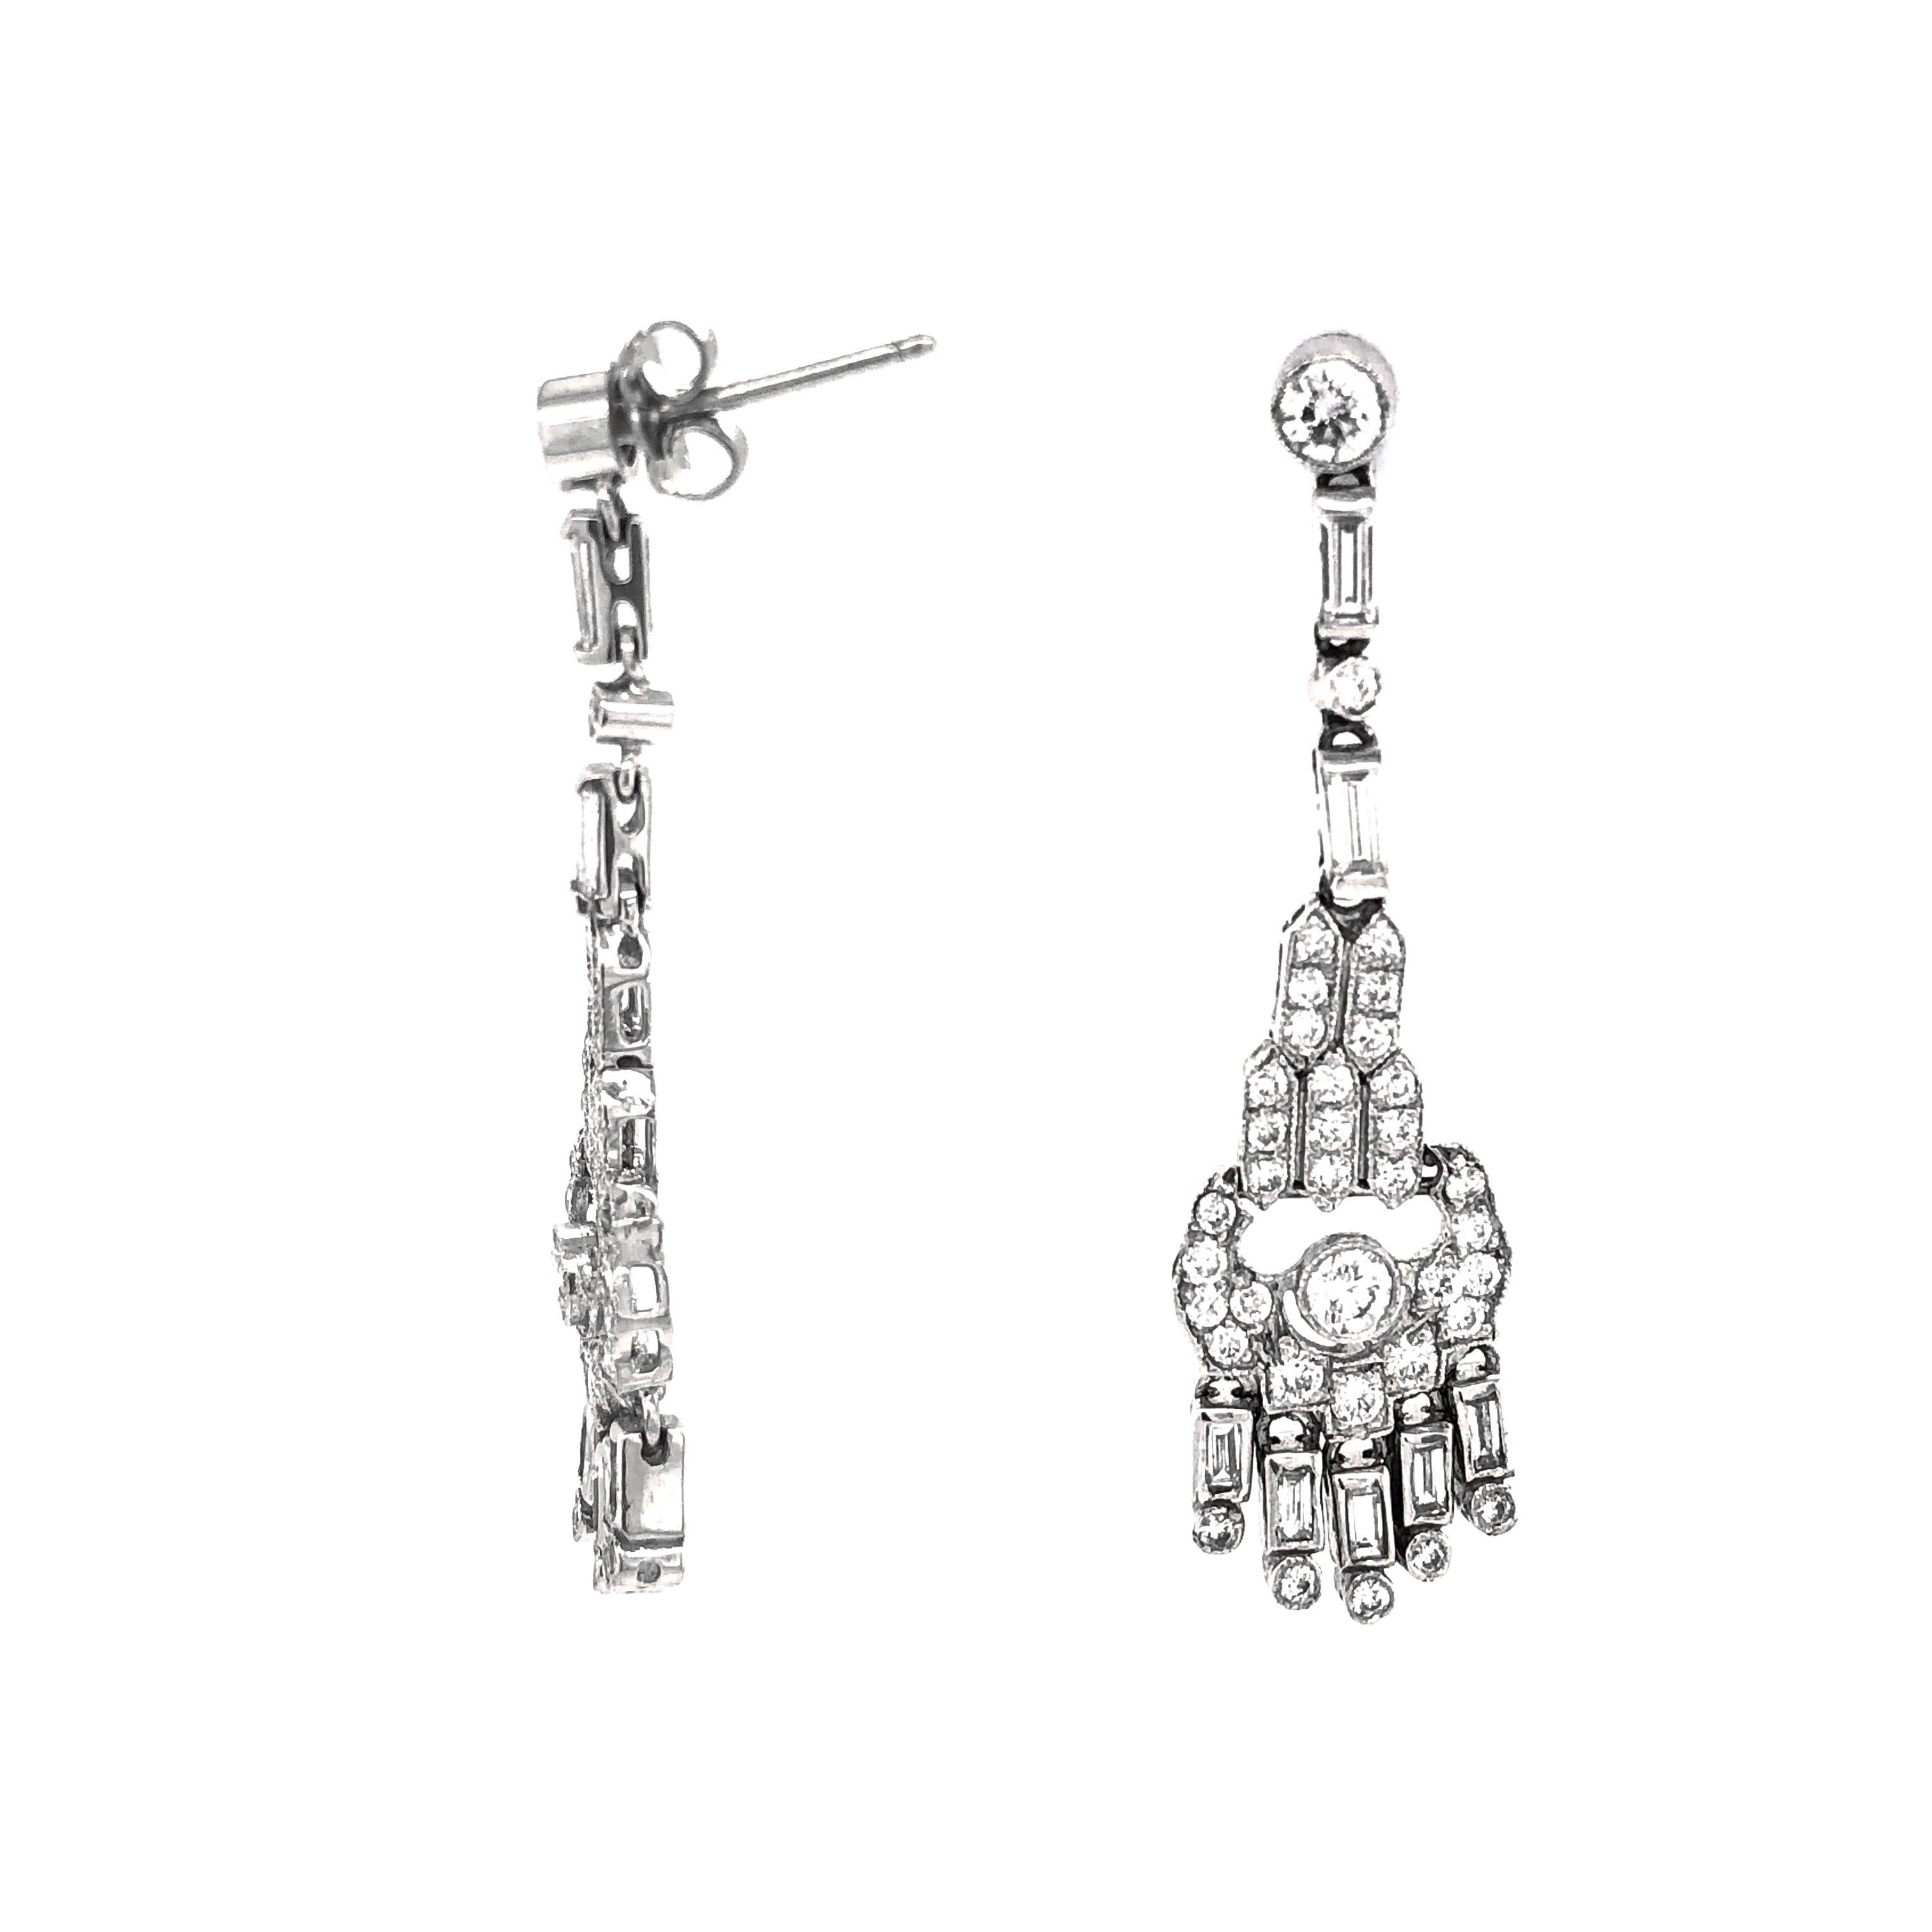 Beautiful classic design of pear shapes drop dangling platinum earrings adorned in white round diamonds 2.49 ct total.   
Diamonds are white and natural in G-H Color Clarity VS.
Platinum 950 metal.
Butterfly studs.
Simple and modern design makes